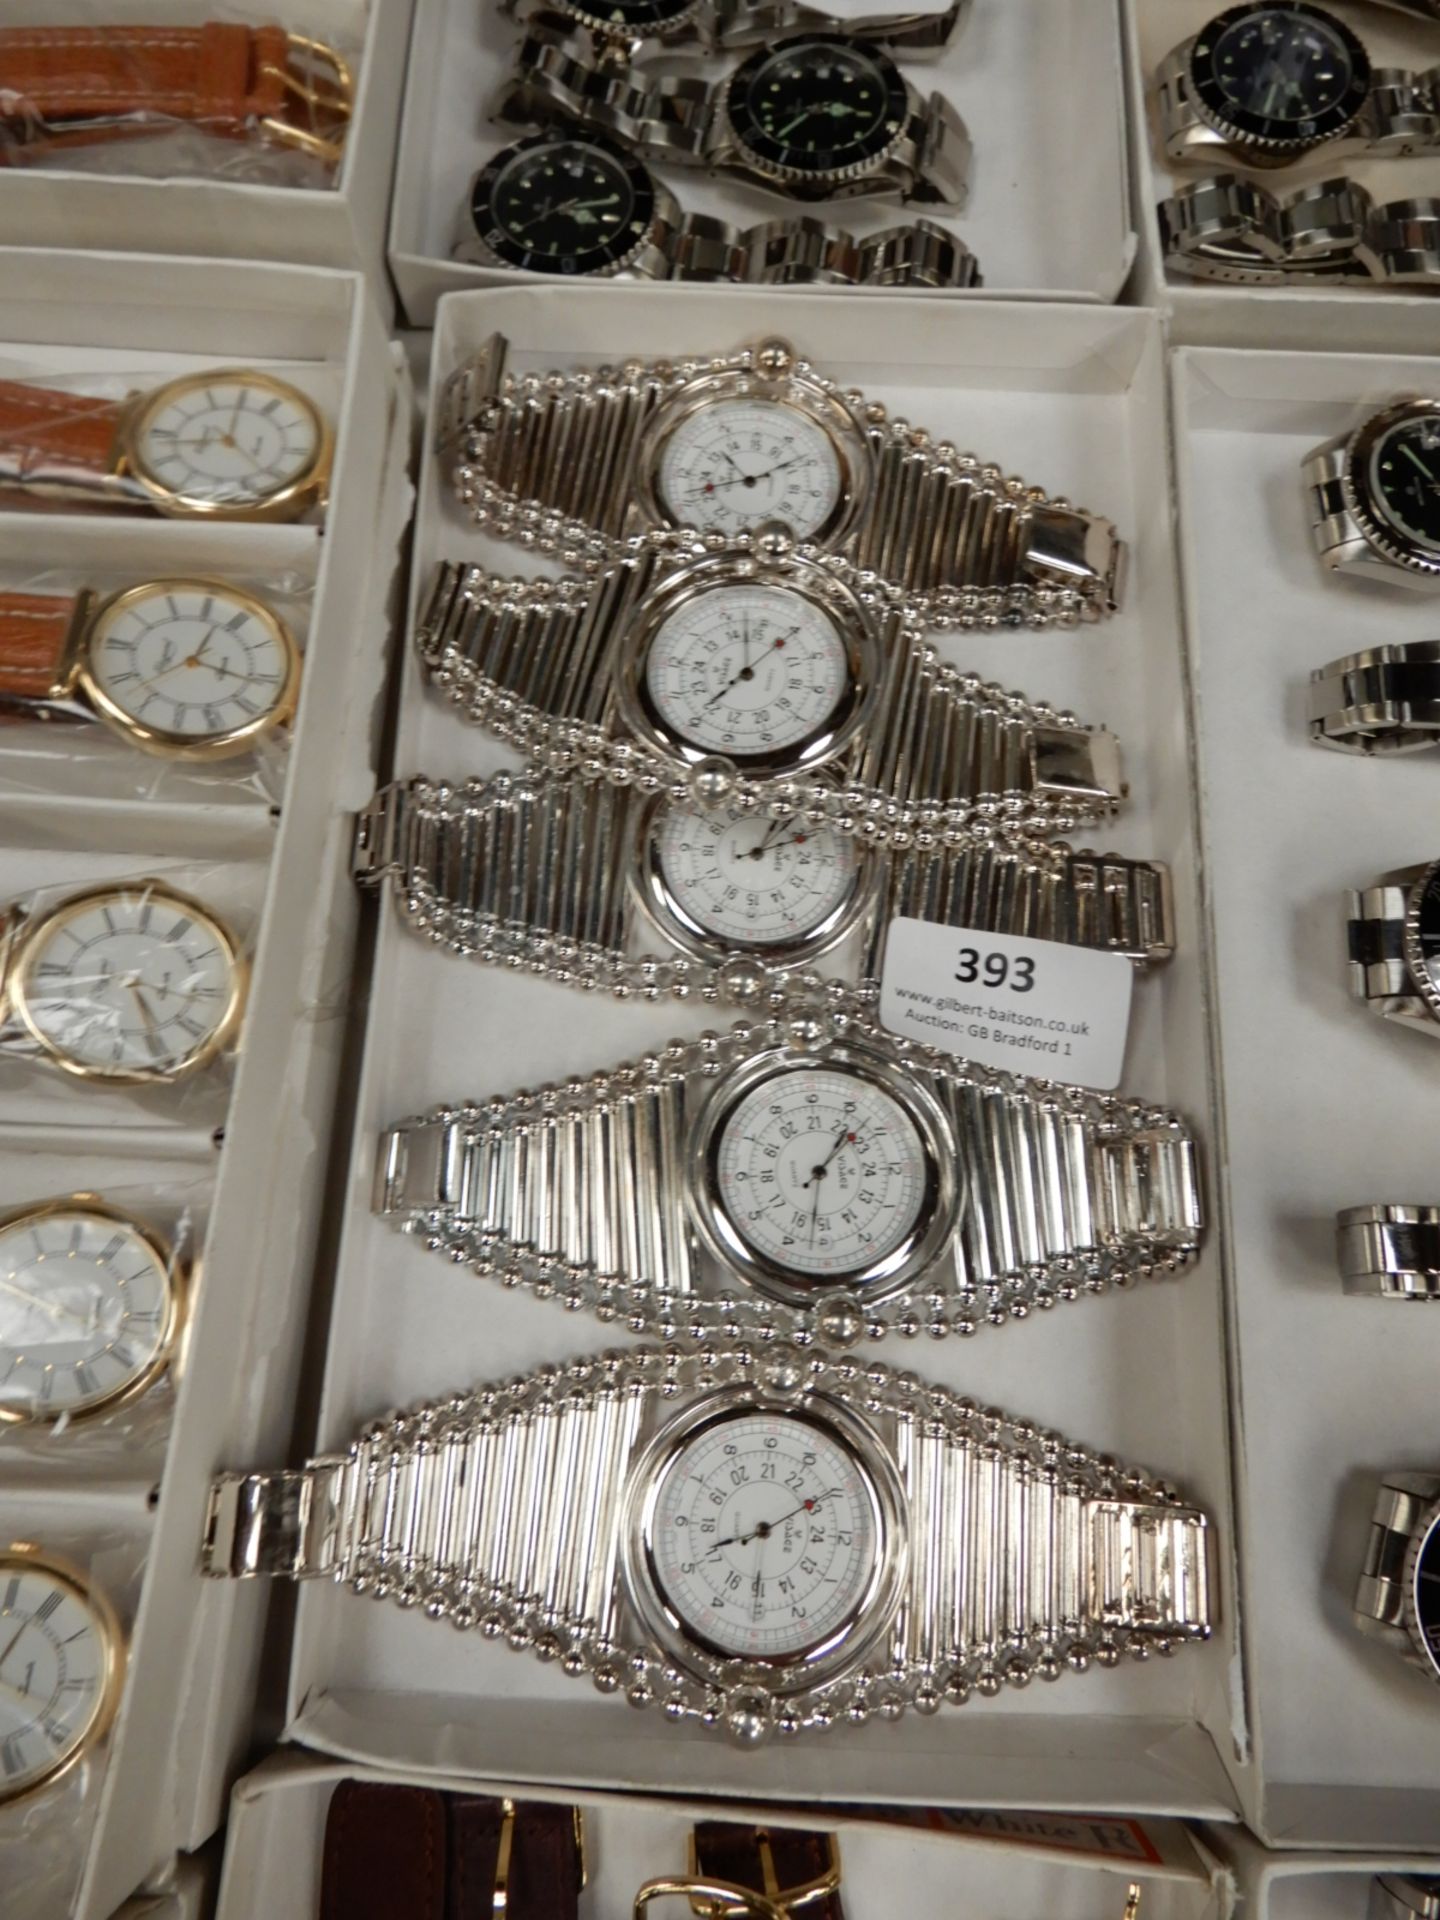 Box Containing 5 Fashion Watches